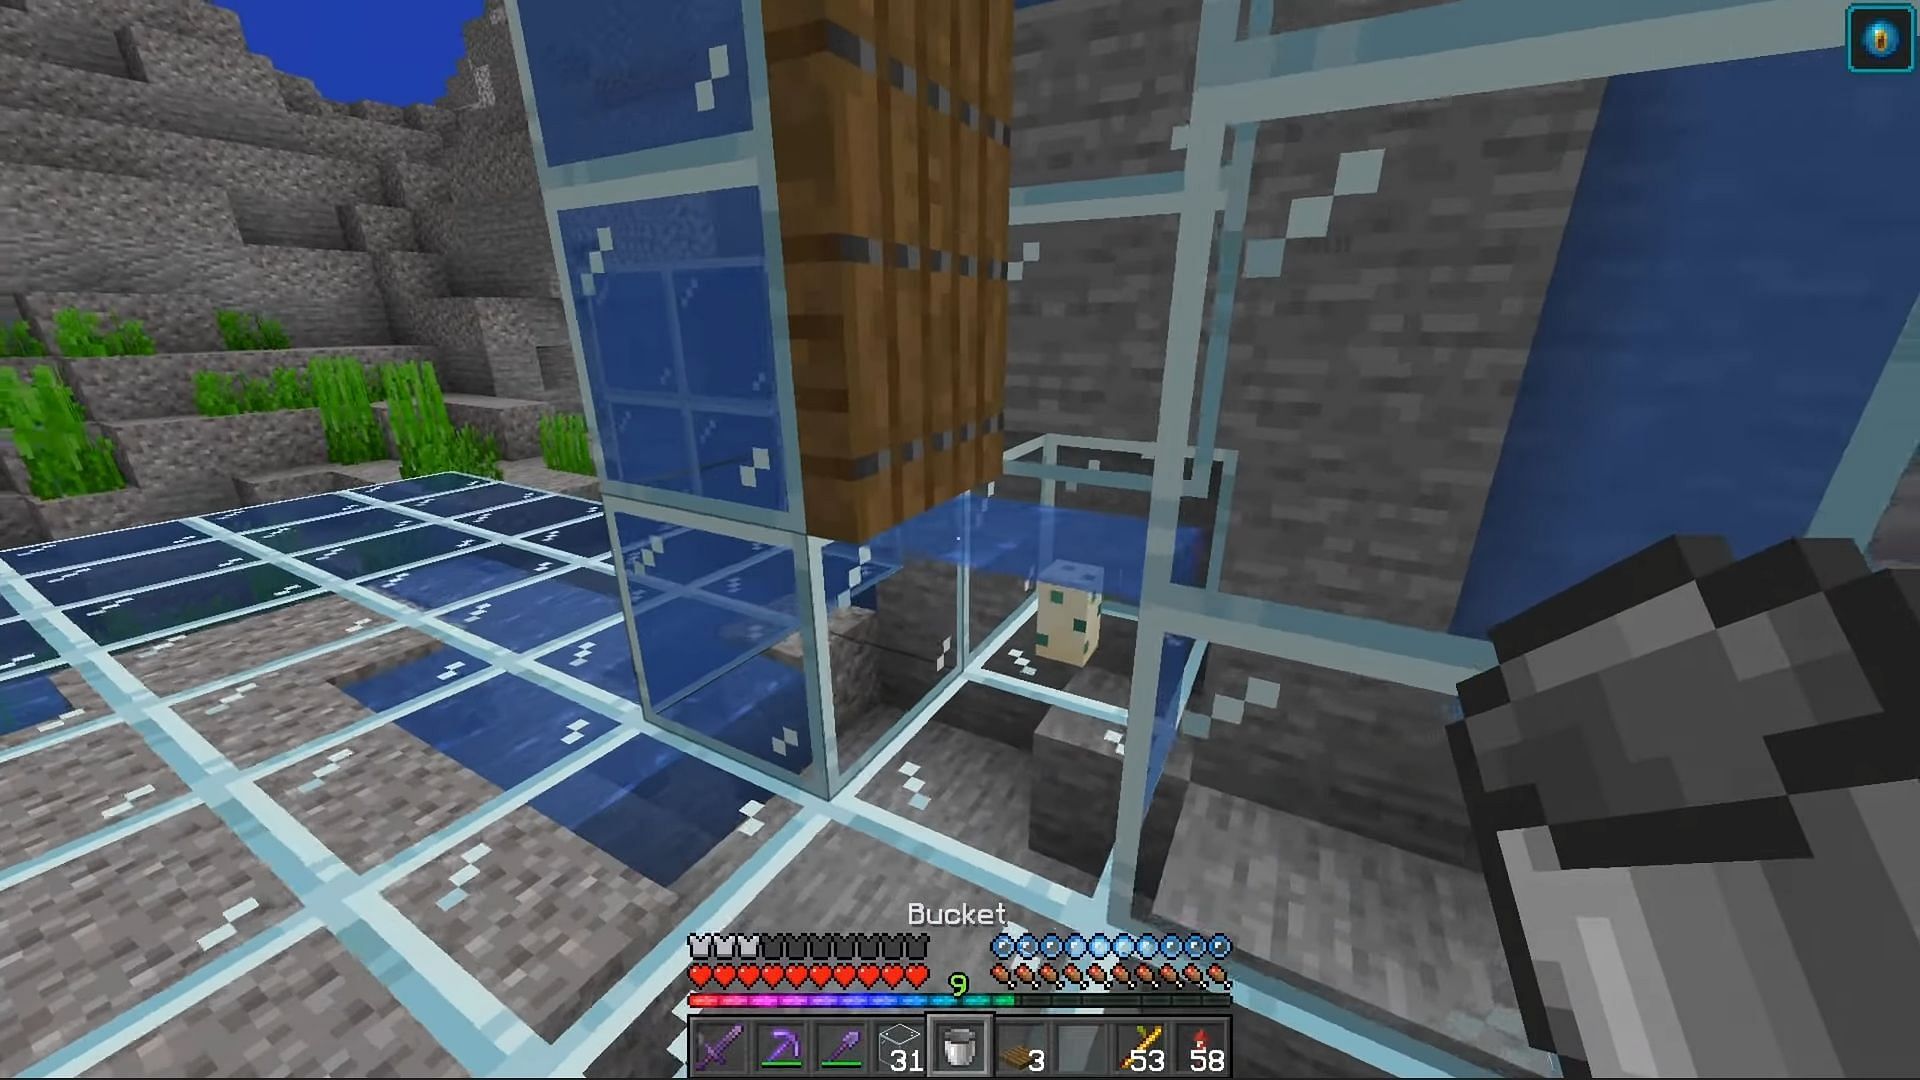 Turtle egg that will lure Drowned Minecraft mobs (Image via YouTube/Chapman Farms)